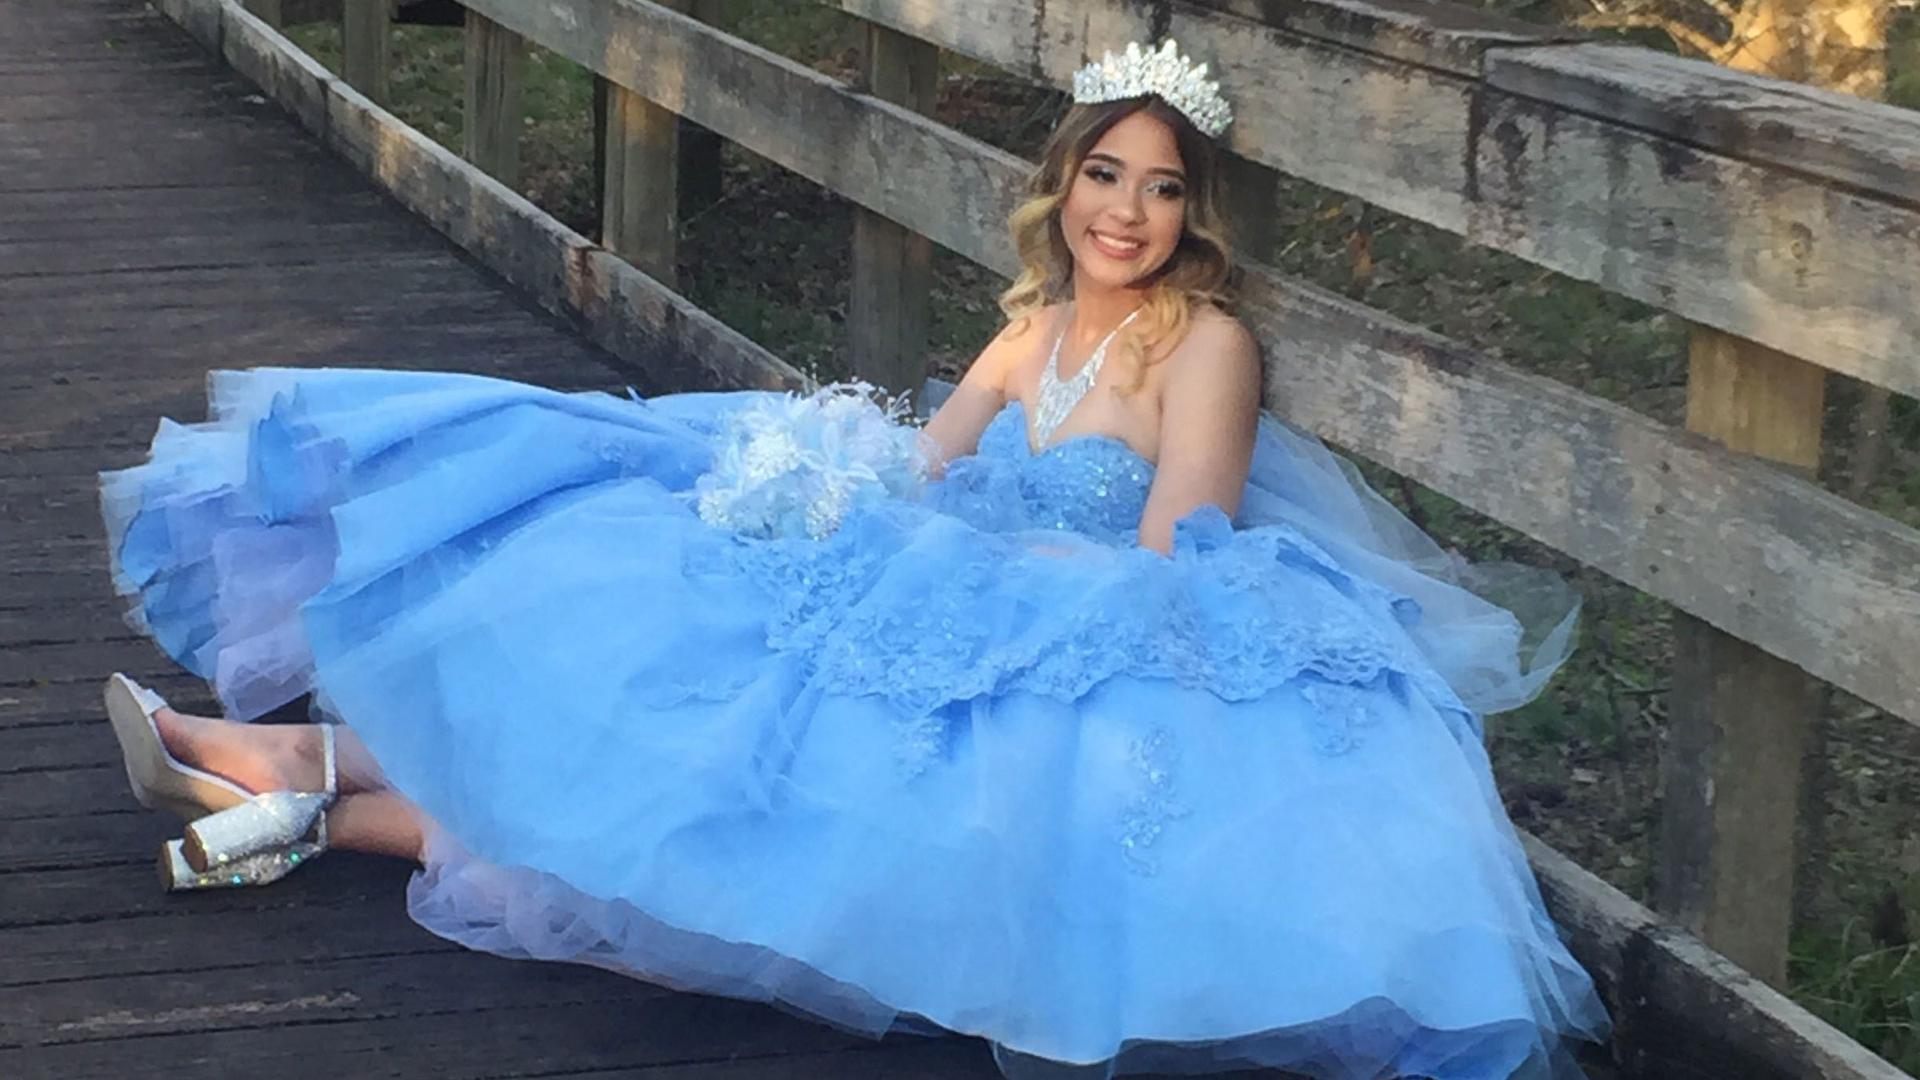 Katelynn Taveras, a teenager in Houston, Texas, poses in the pale-blue dress she selected for her quinceañera. The party was canceled due to the coronavirus outbreak.